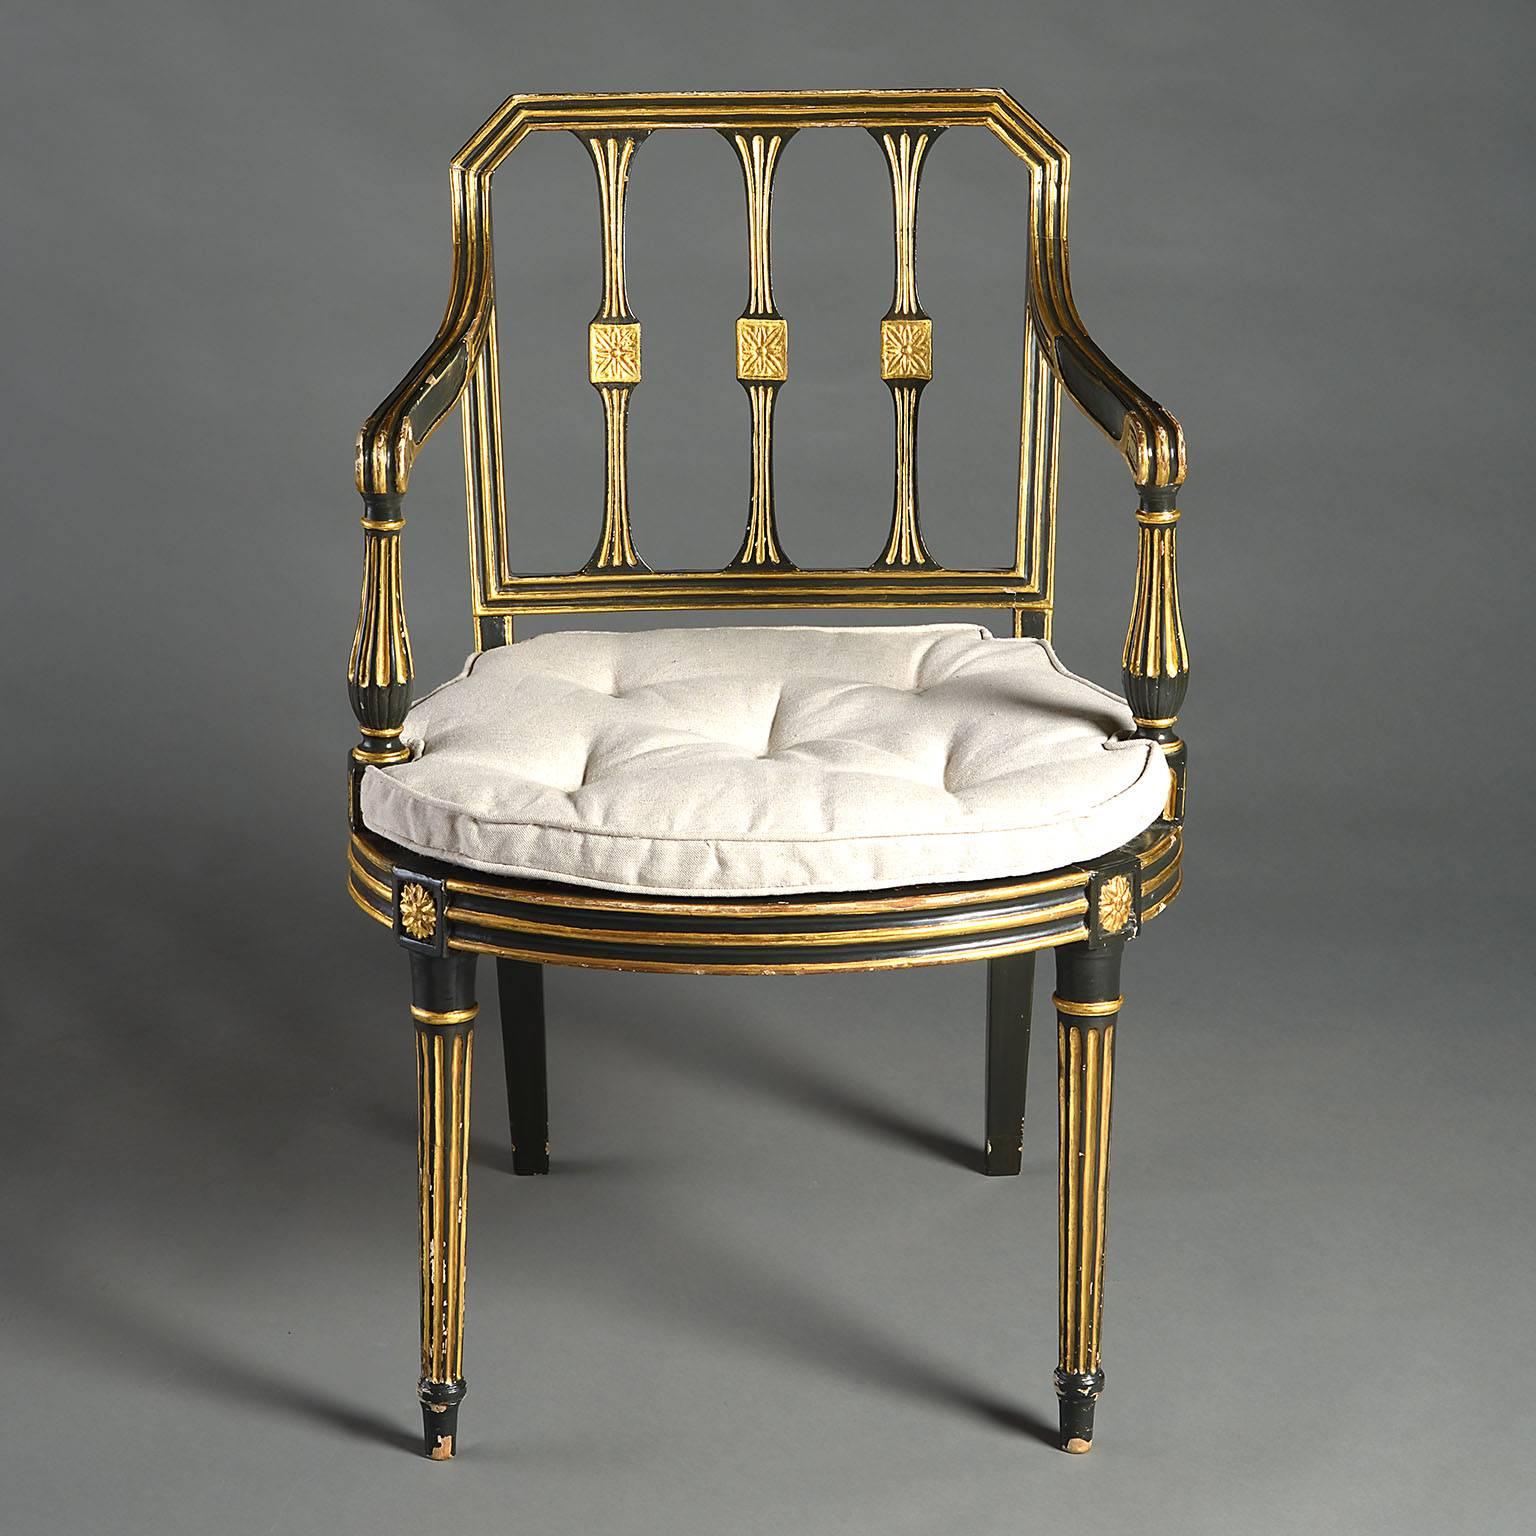 An early 19th century ebonized and gilded armchair in the manner of George Seddon, with fluted legs and arms, the seat caned, now with squab cushions.